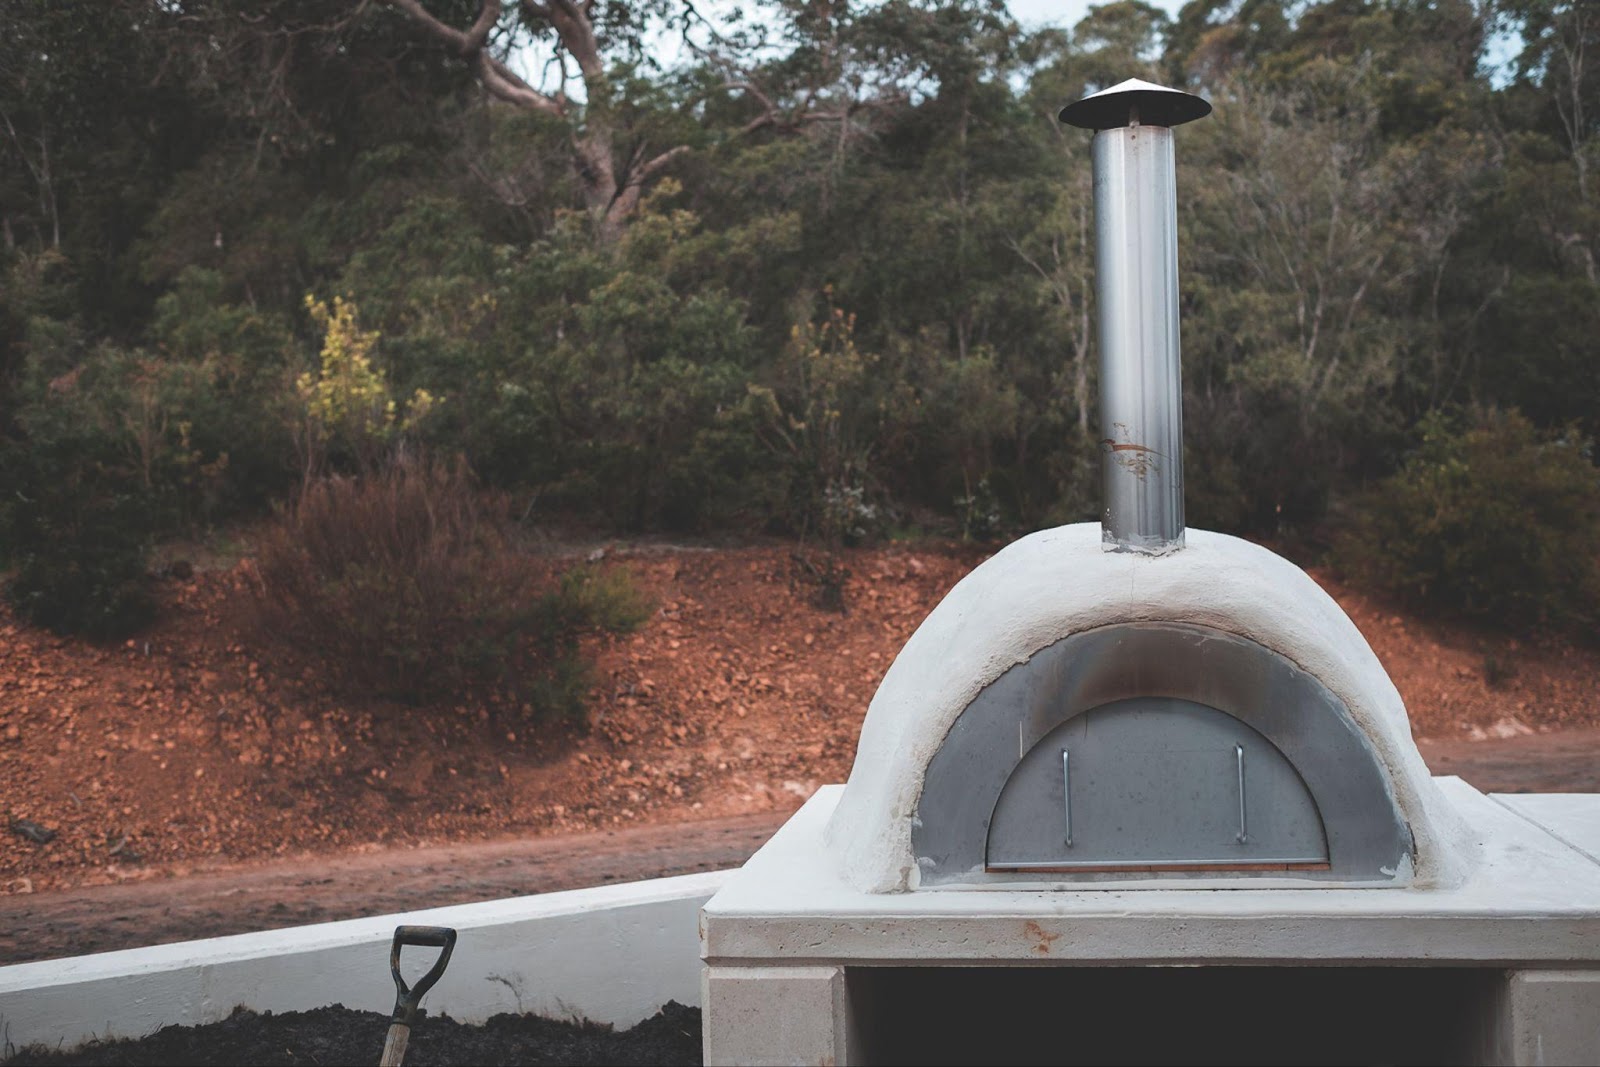 A outdoor oven with a chimney

Description automatically generated